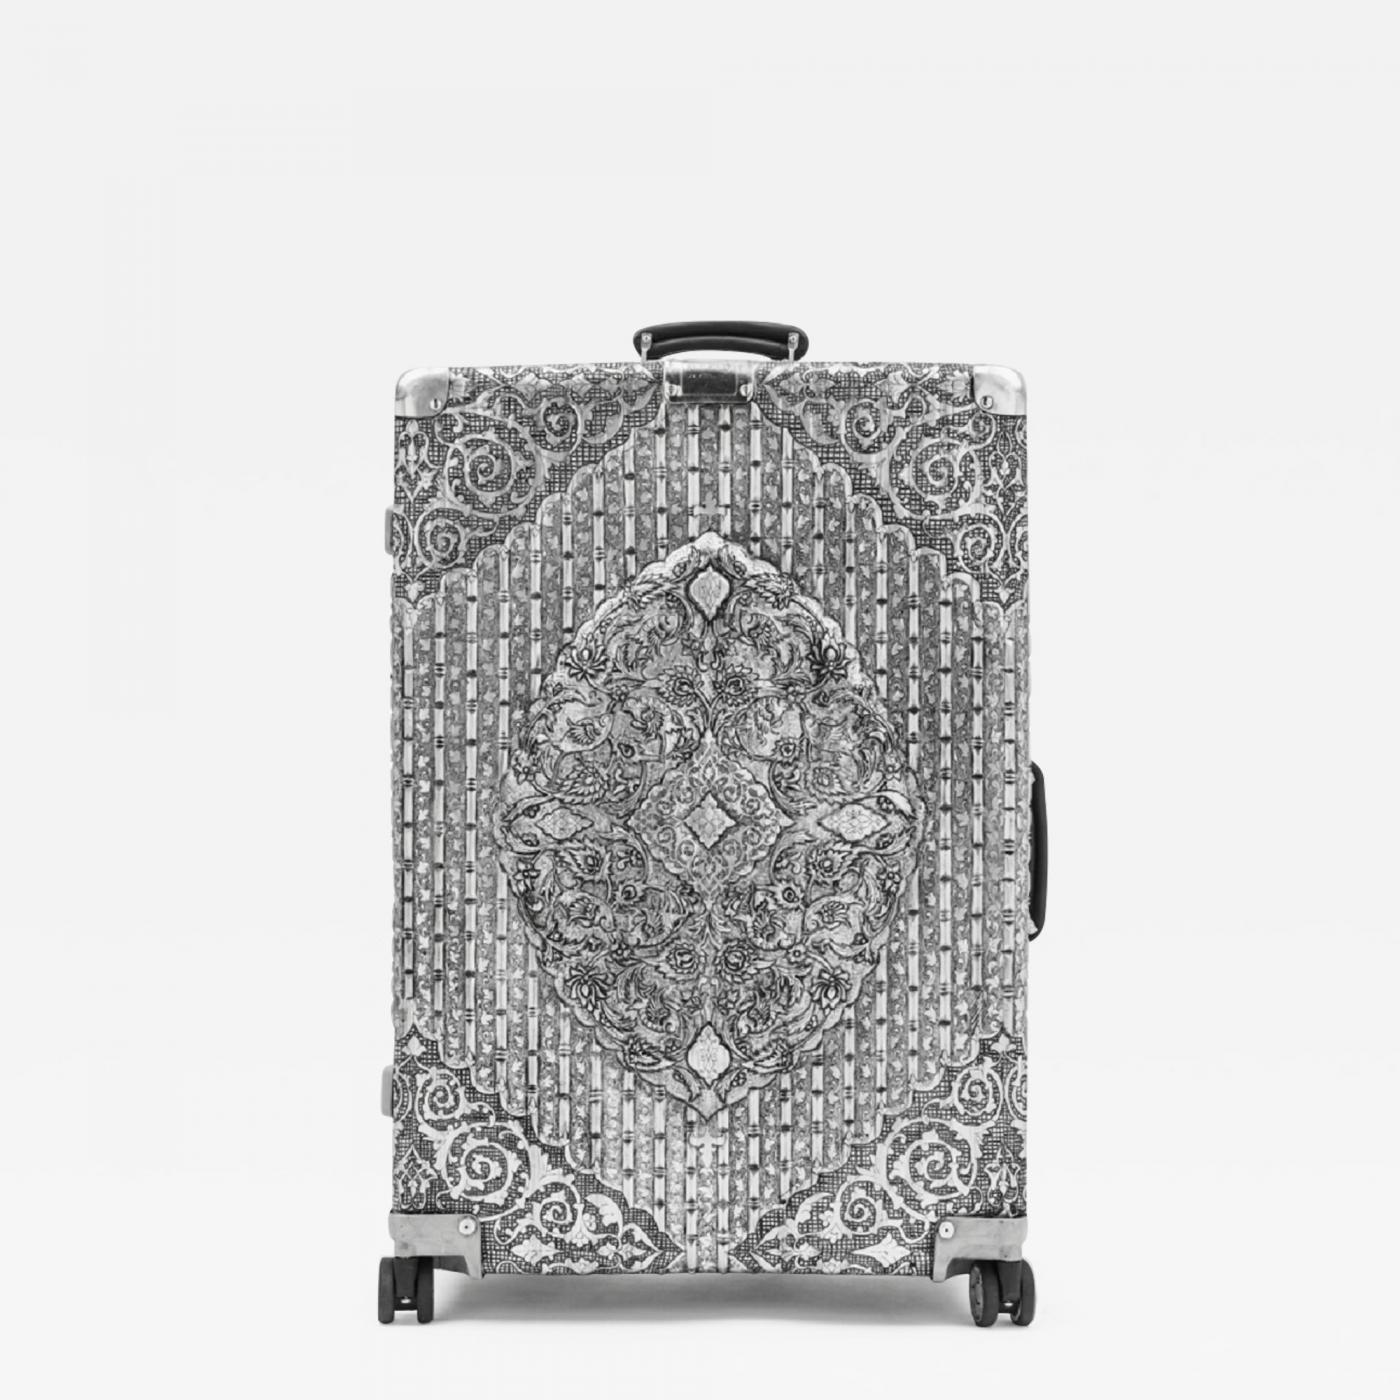 Wim Delvoye, Rimowa Classic Flight Multiwheel 971.63.00.4 (2014), Available for Sale